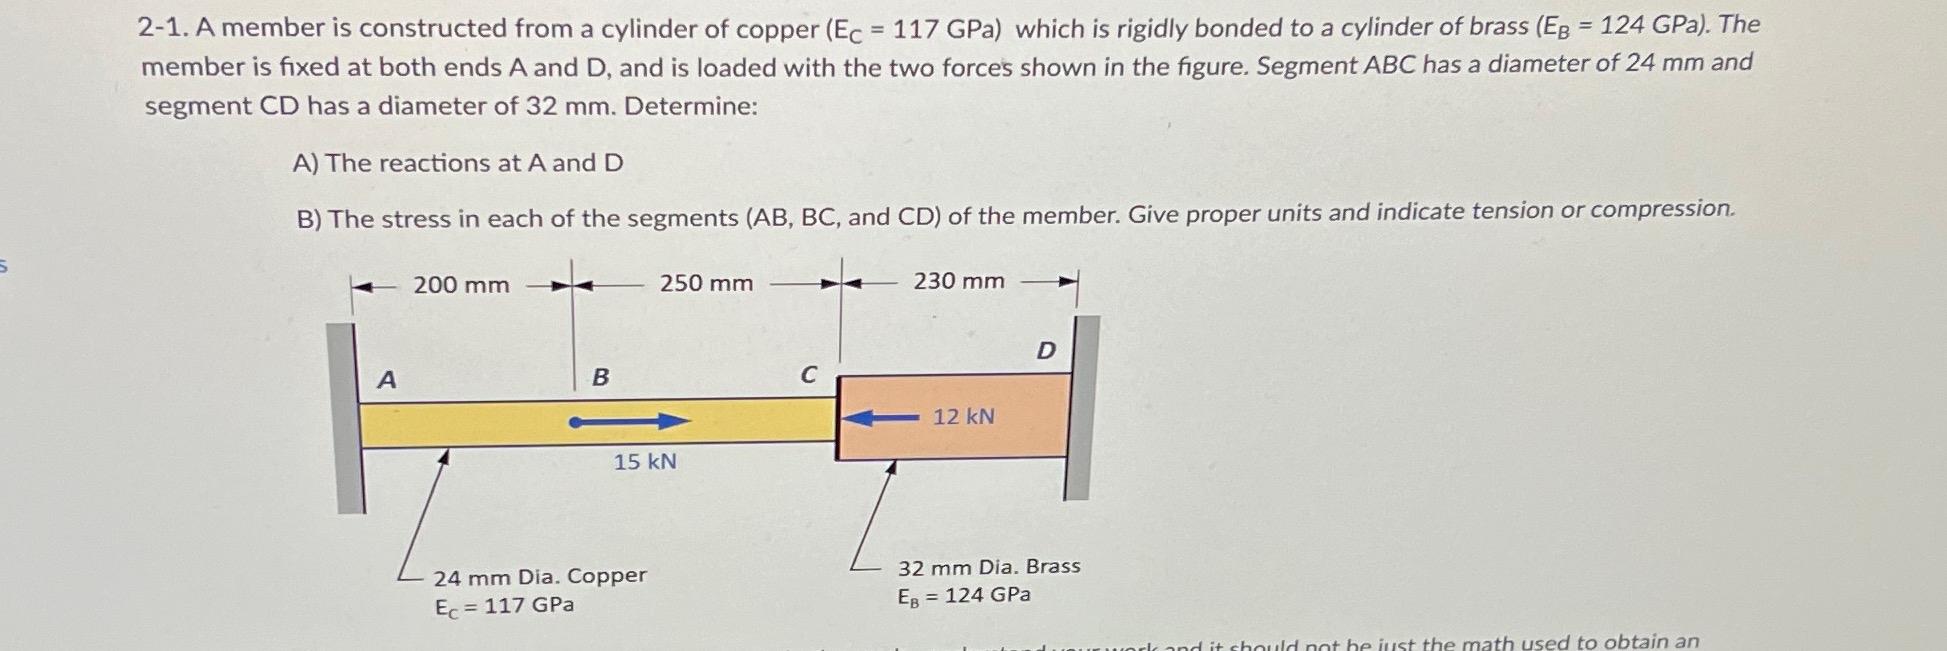 5 2-1. A member is constructed from a cylinder of copper (Ec = 117 GPa) which is rigidly bonded to a cylinder